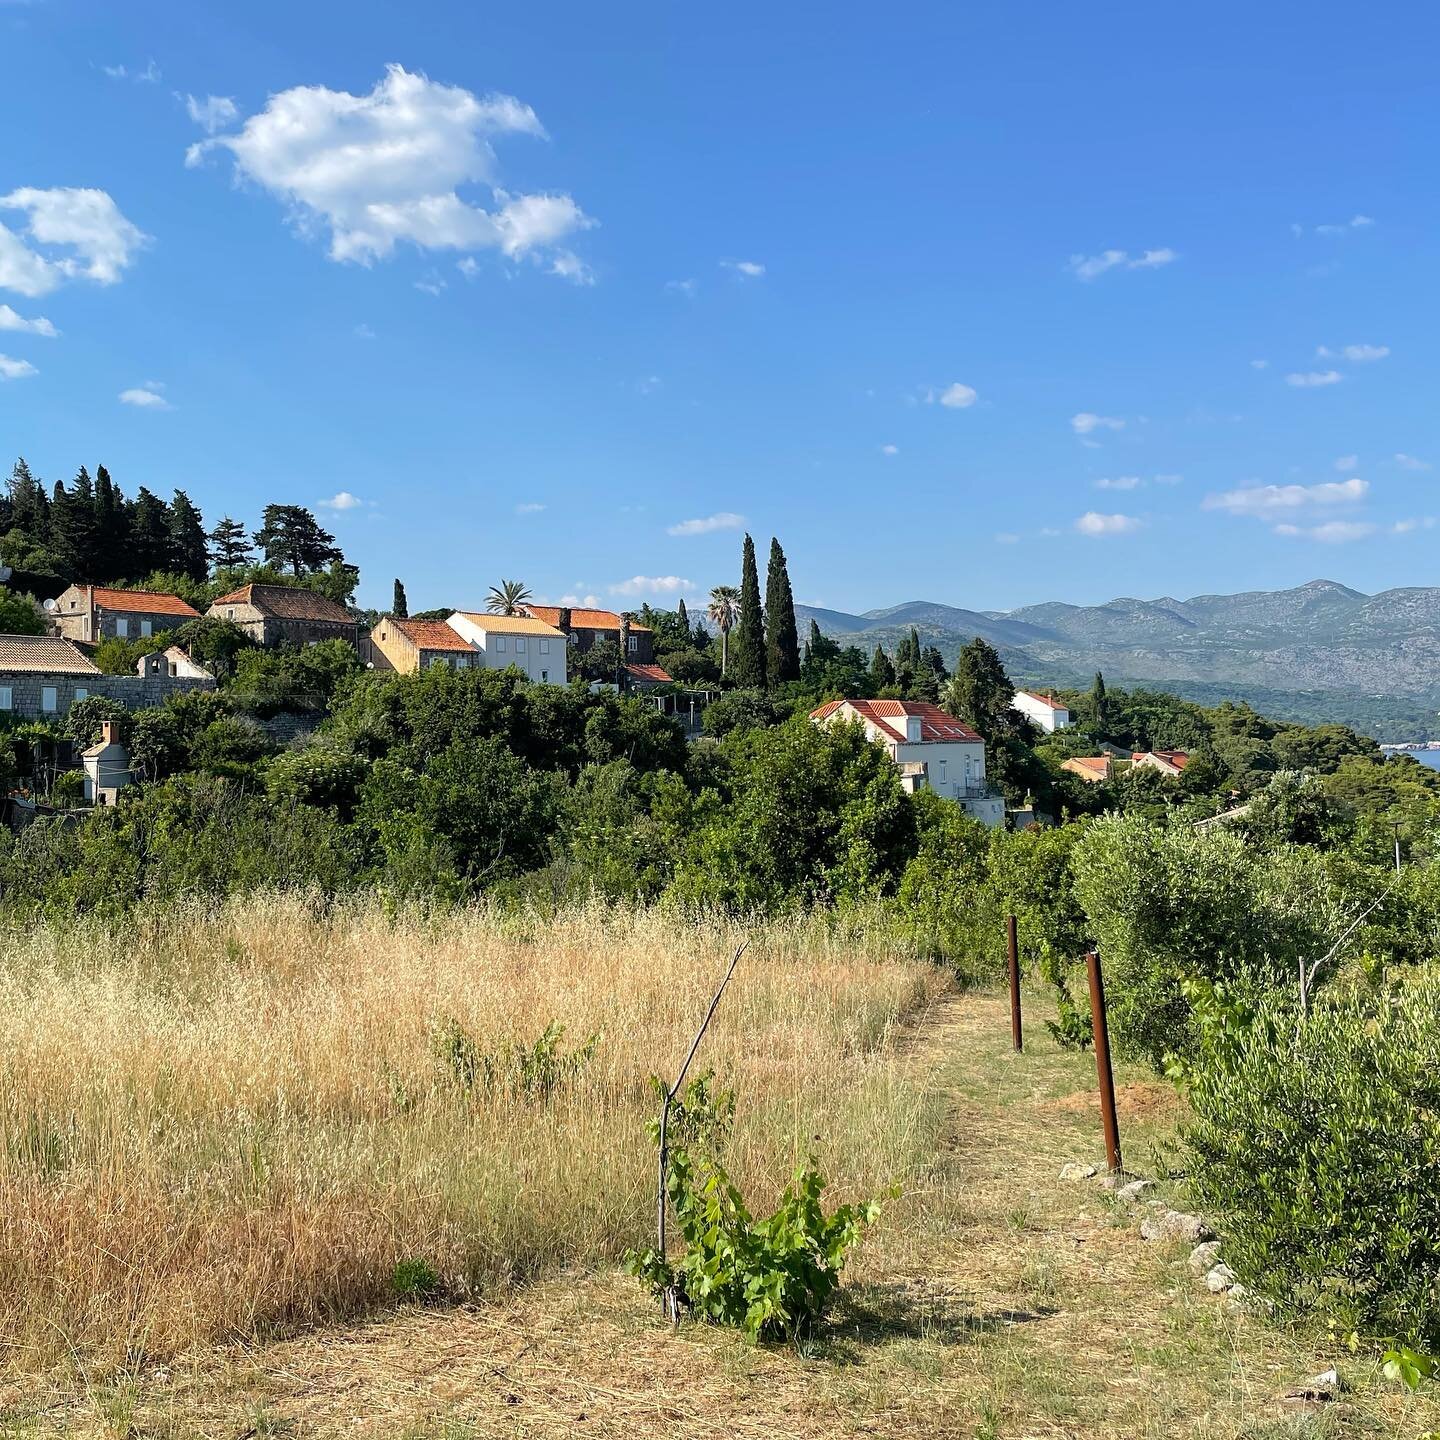 So long to the beautiful island of Kolocep, Croatia. We spent a fulfilling 5 days hiking your beautiful trails and making our own meals in our small apartment kitchen.

If your every visiting Dubrovnik, Croatia - I recommend taking the time to make a